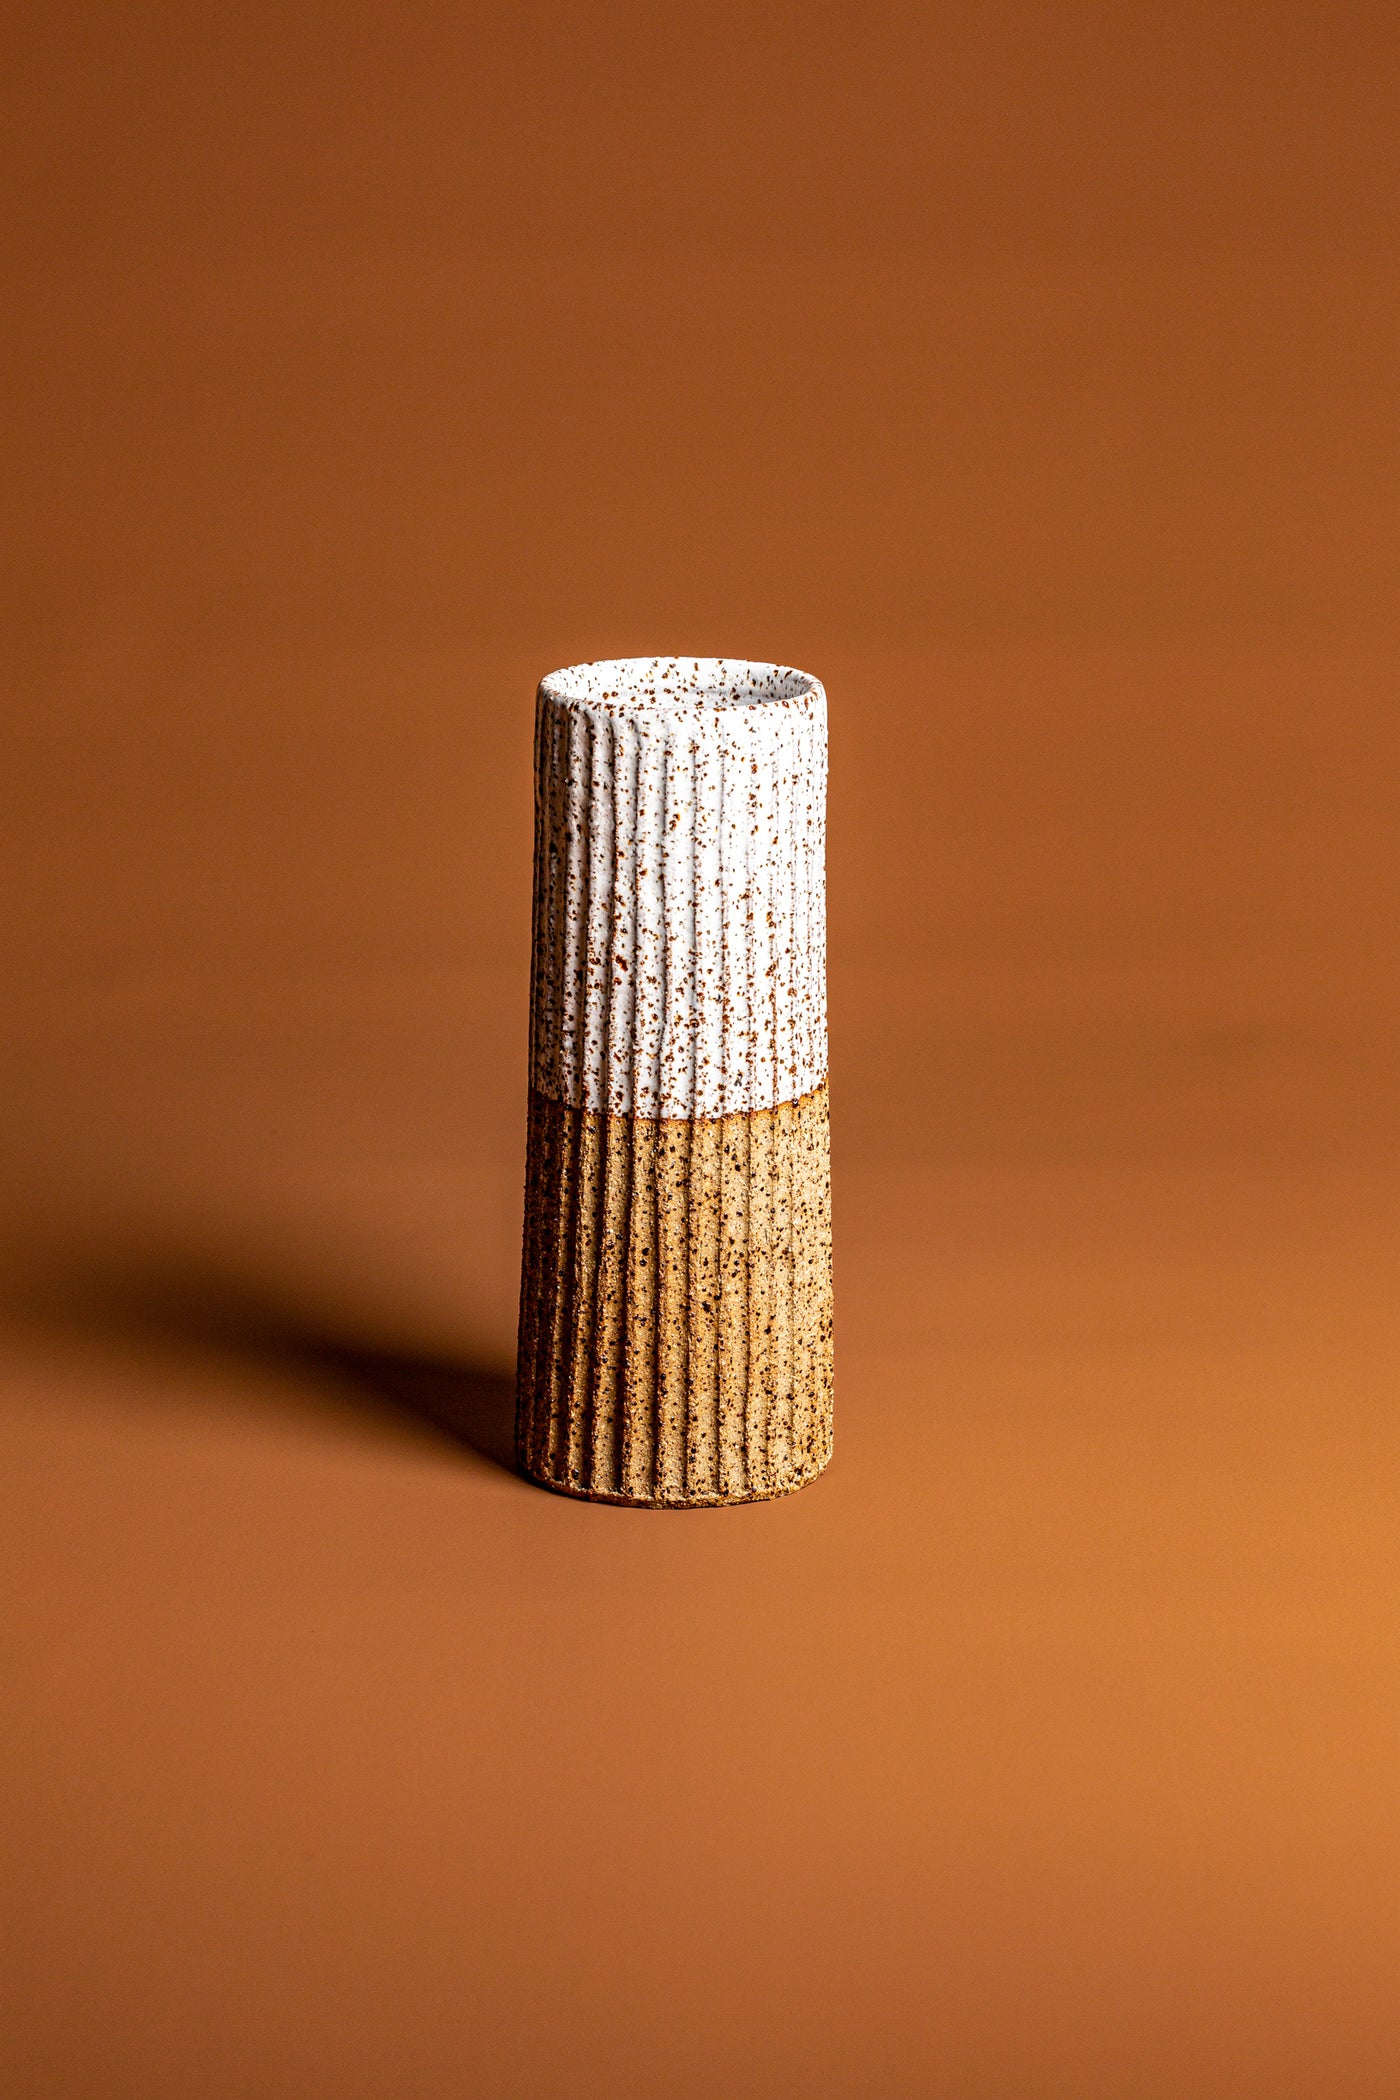 Handmade with traditional wheel-thrown techniques and fired at high temperatures for durability. This handcrafted vase is a natural, beautiful piece of Australian homeware. Type: Ceramic Vase  Colour: White and Brown  Materials: Stoneware  Dimensions: 220 x 85mm